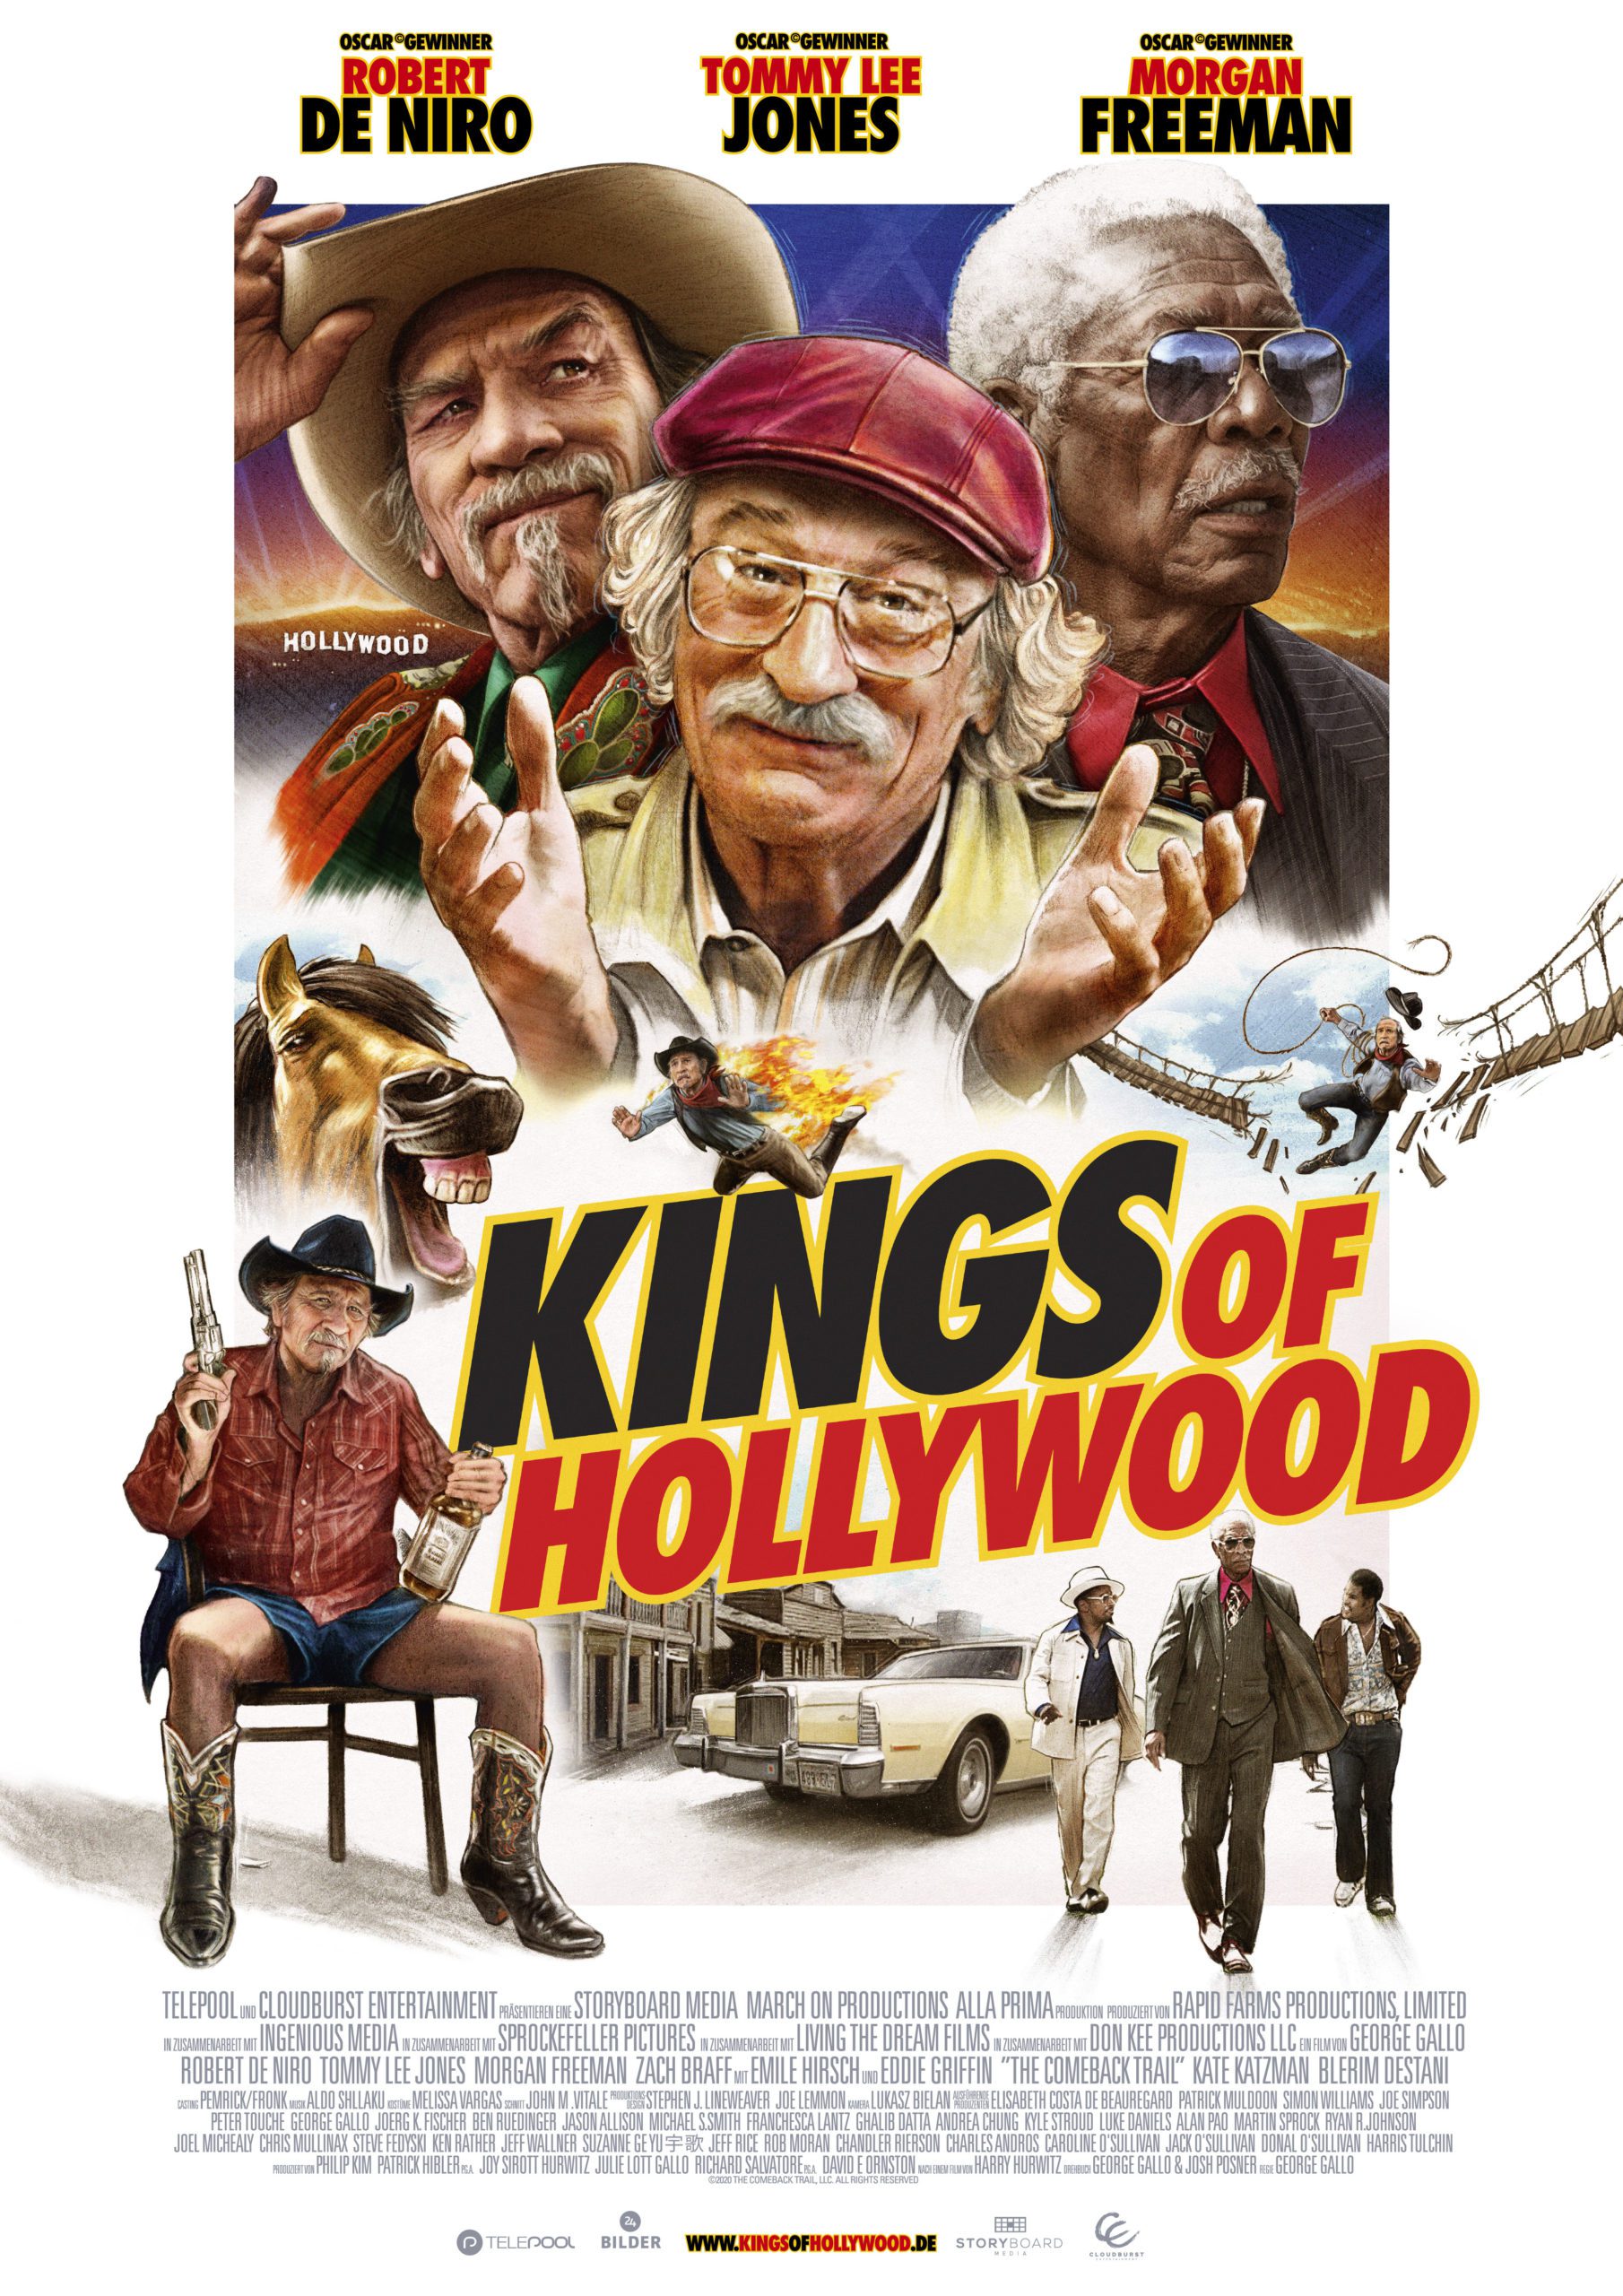 FEATURE: Die Mode von "KINGS OF HOLLYWOOD"